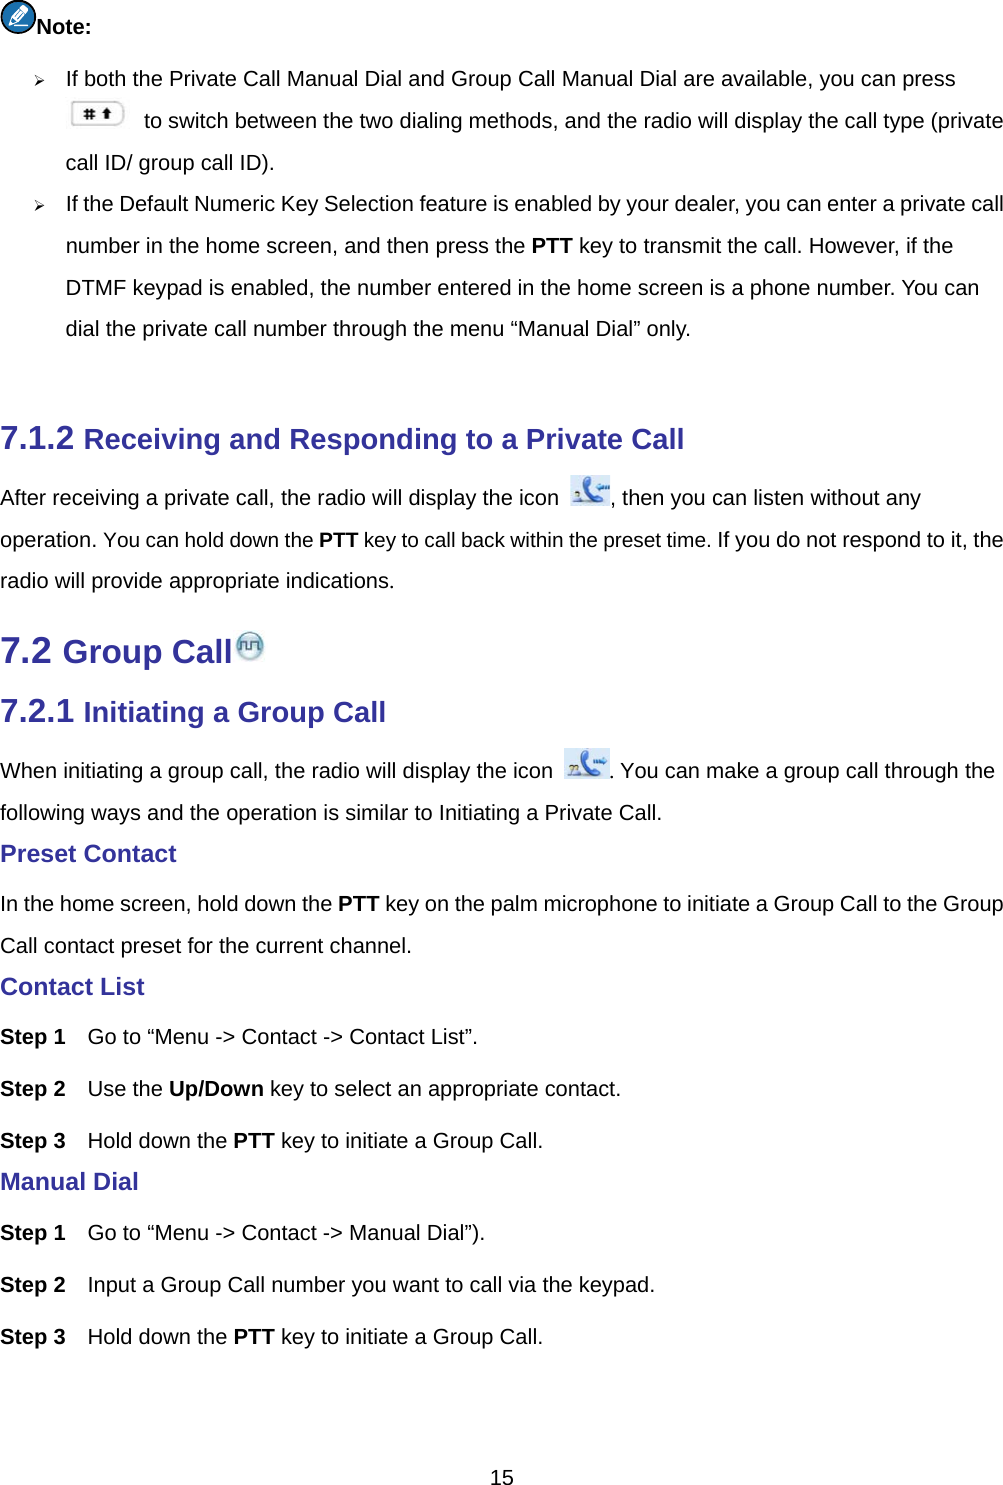  15  Note:    If both the Private Call Manual Dial and Group Call Manual Dial are available, you can press   to switch between the two dialing methods, and the radio will display the call type (private call ID/ group call ID).    If the Default Numeric Key Selection feature is enabled by your dealer, you can enter a private call number in the home screen, and then press the PTT key to transmit the call. However, if the DTMF keypad is enabled, the number entered in the home screen is a phone number. You can dial the private call number through the menu “Manual Dial” only.    7.1.2 Receiving and Responding to a Private Call After receiving a private call, the radio will display the icon  , then you can listen without any operation. You can hold down the PTT key to call back within the preset time. If you do not respond to it, the radio will provide appropriate indications.   7.2 Group Call  7.2.1 Initiating a Group Call When initiating a group call, the radio will display the icon  . You can make a group call through the following ways and the operation is similar to Initiating a Private Call.   Preset Contact   In the home screen, hold down the PTT key on the palm microphone to initiate a Group Call to the Group Call contact preset for the current channel.   Contact List Step 1  Go to “Menu -&gt; Contact -&gt; Contact List”. Step 2  Use the Up/Down key to select an appropriate contact. Step 3  Hold down the PTT key to initiate a Group Call.   Manual Dial Step 1  Go to “Menu -&gt; Contact -&gt; Manual Dial”). Step 2  Input a Group Call number you want to call via the keypad.   Step 3  Hold down the PTT key to initiate a Group Call.   